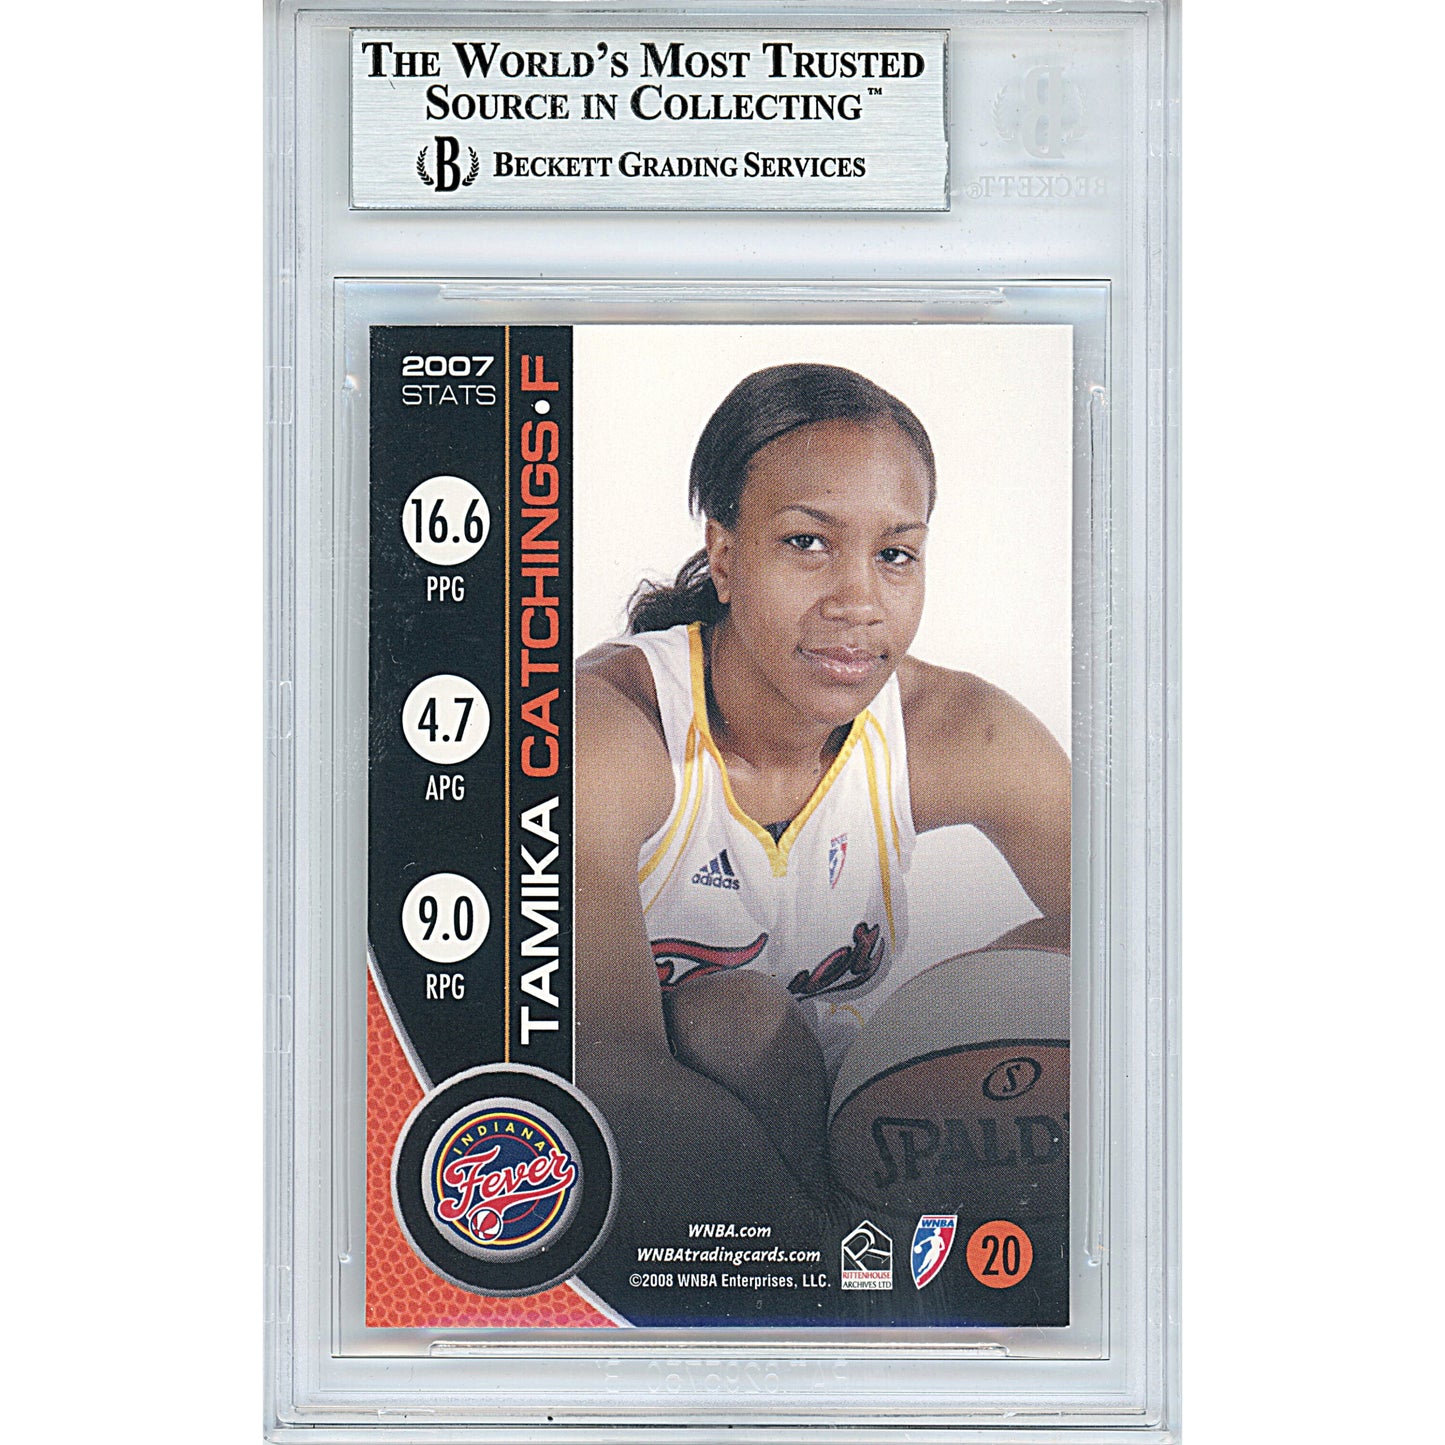 Basketballs- Autographed- Tamika Catchings Signed Indiana Fever 2008 WNBA Basketball Card Beckett BAS Slabbed 00013799397 - 102